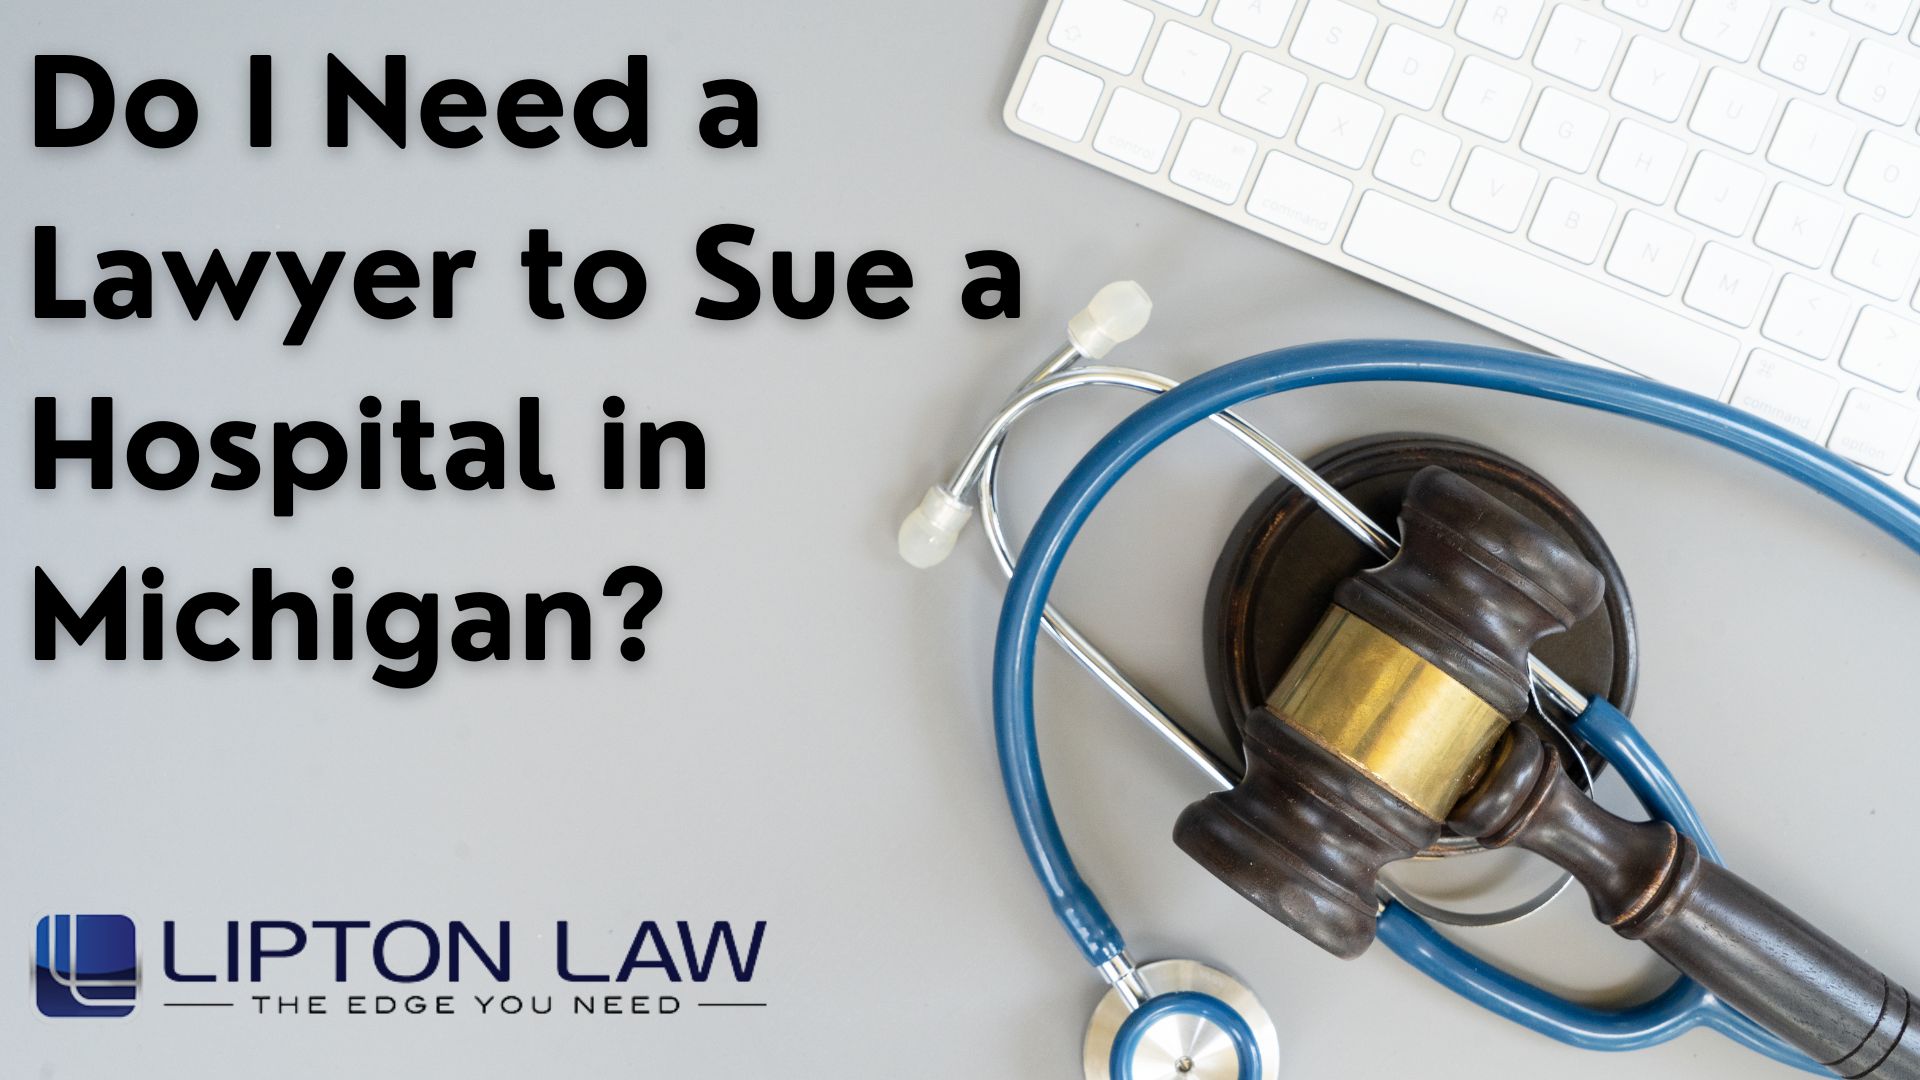 Do I Need a Lawyer to Sue a Hospital in Michigan